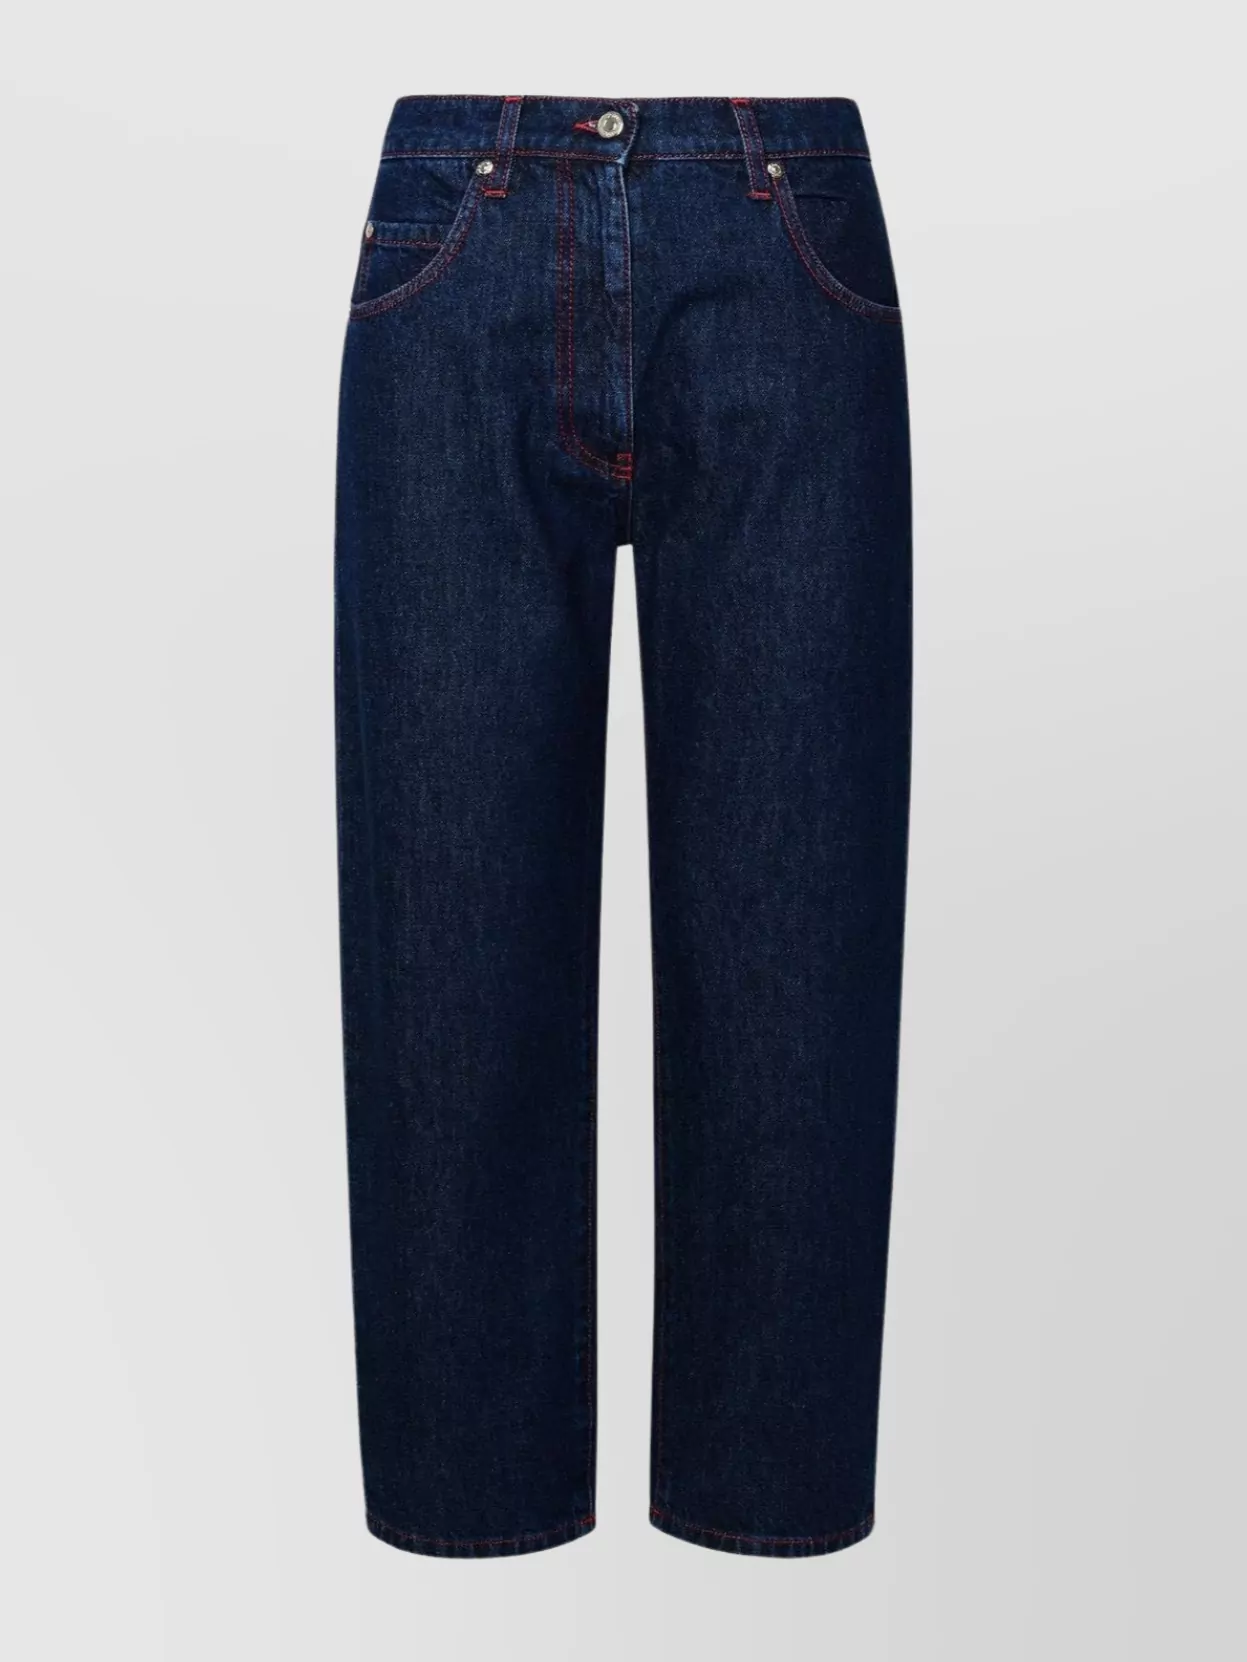 Shop Msgm Denim Trousers With Belt Loops And Contrast Stitching